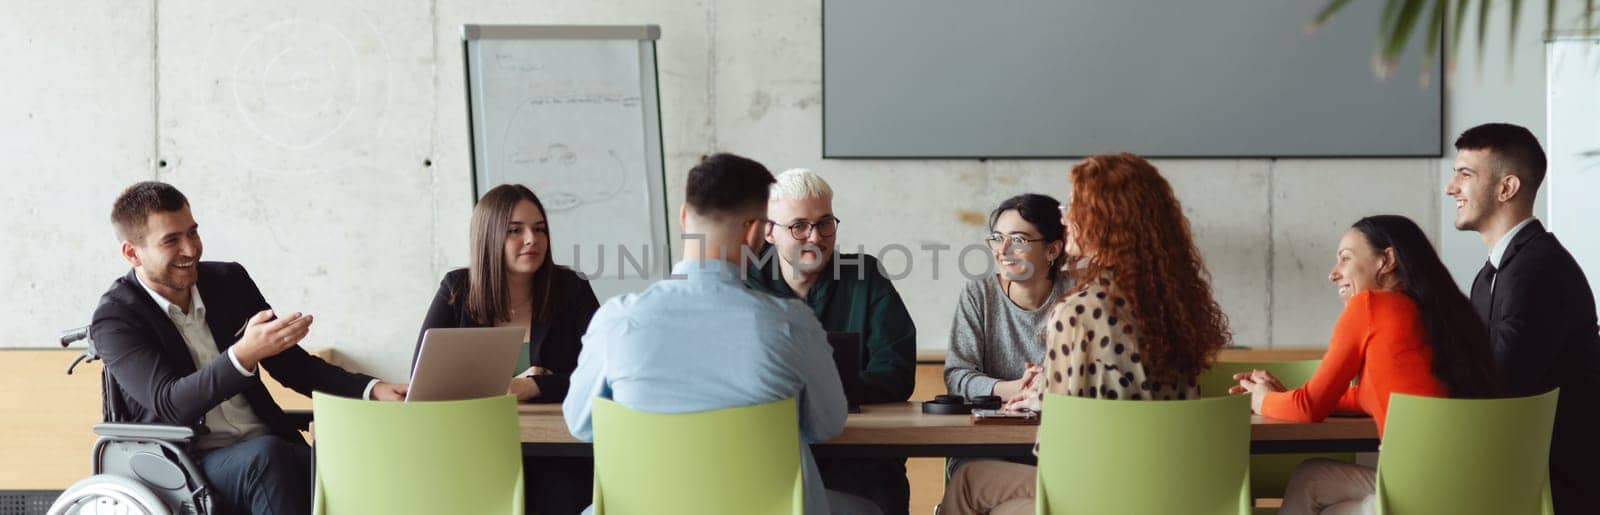 Wide crop photo of a diverse group of business professionals, including an person with a disability, gathered at a modern office for a productive and inclusive meeting. by dotshock